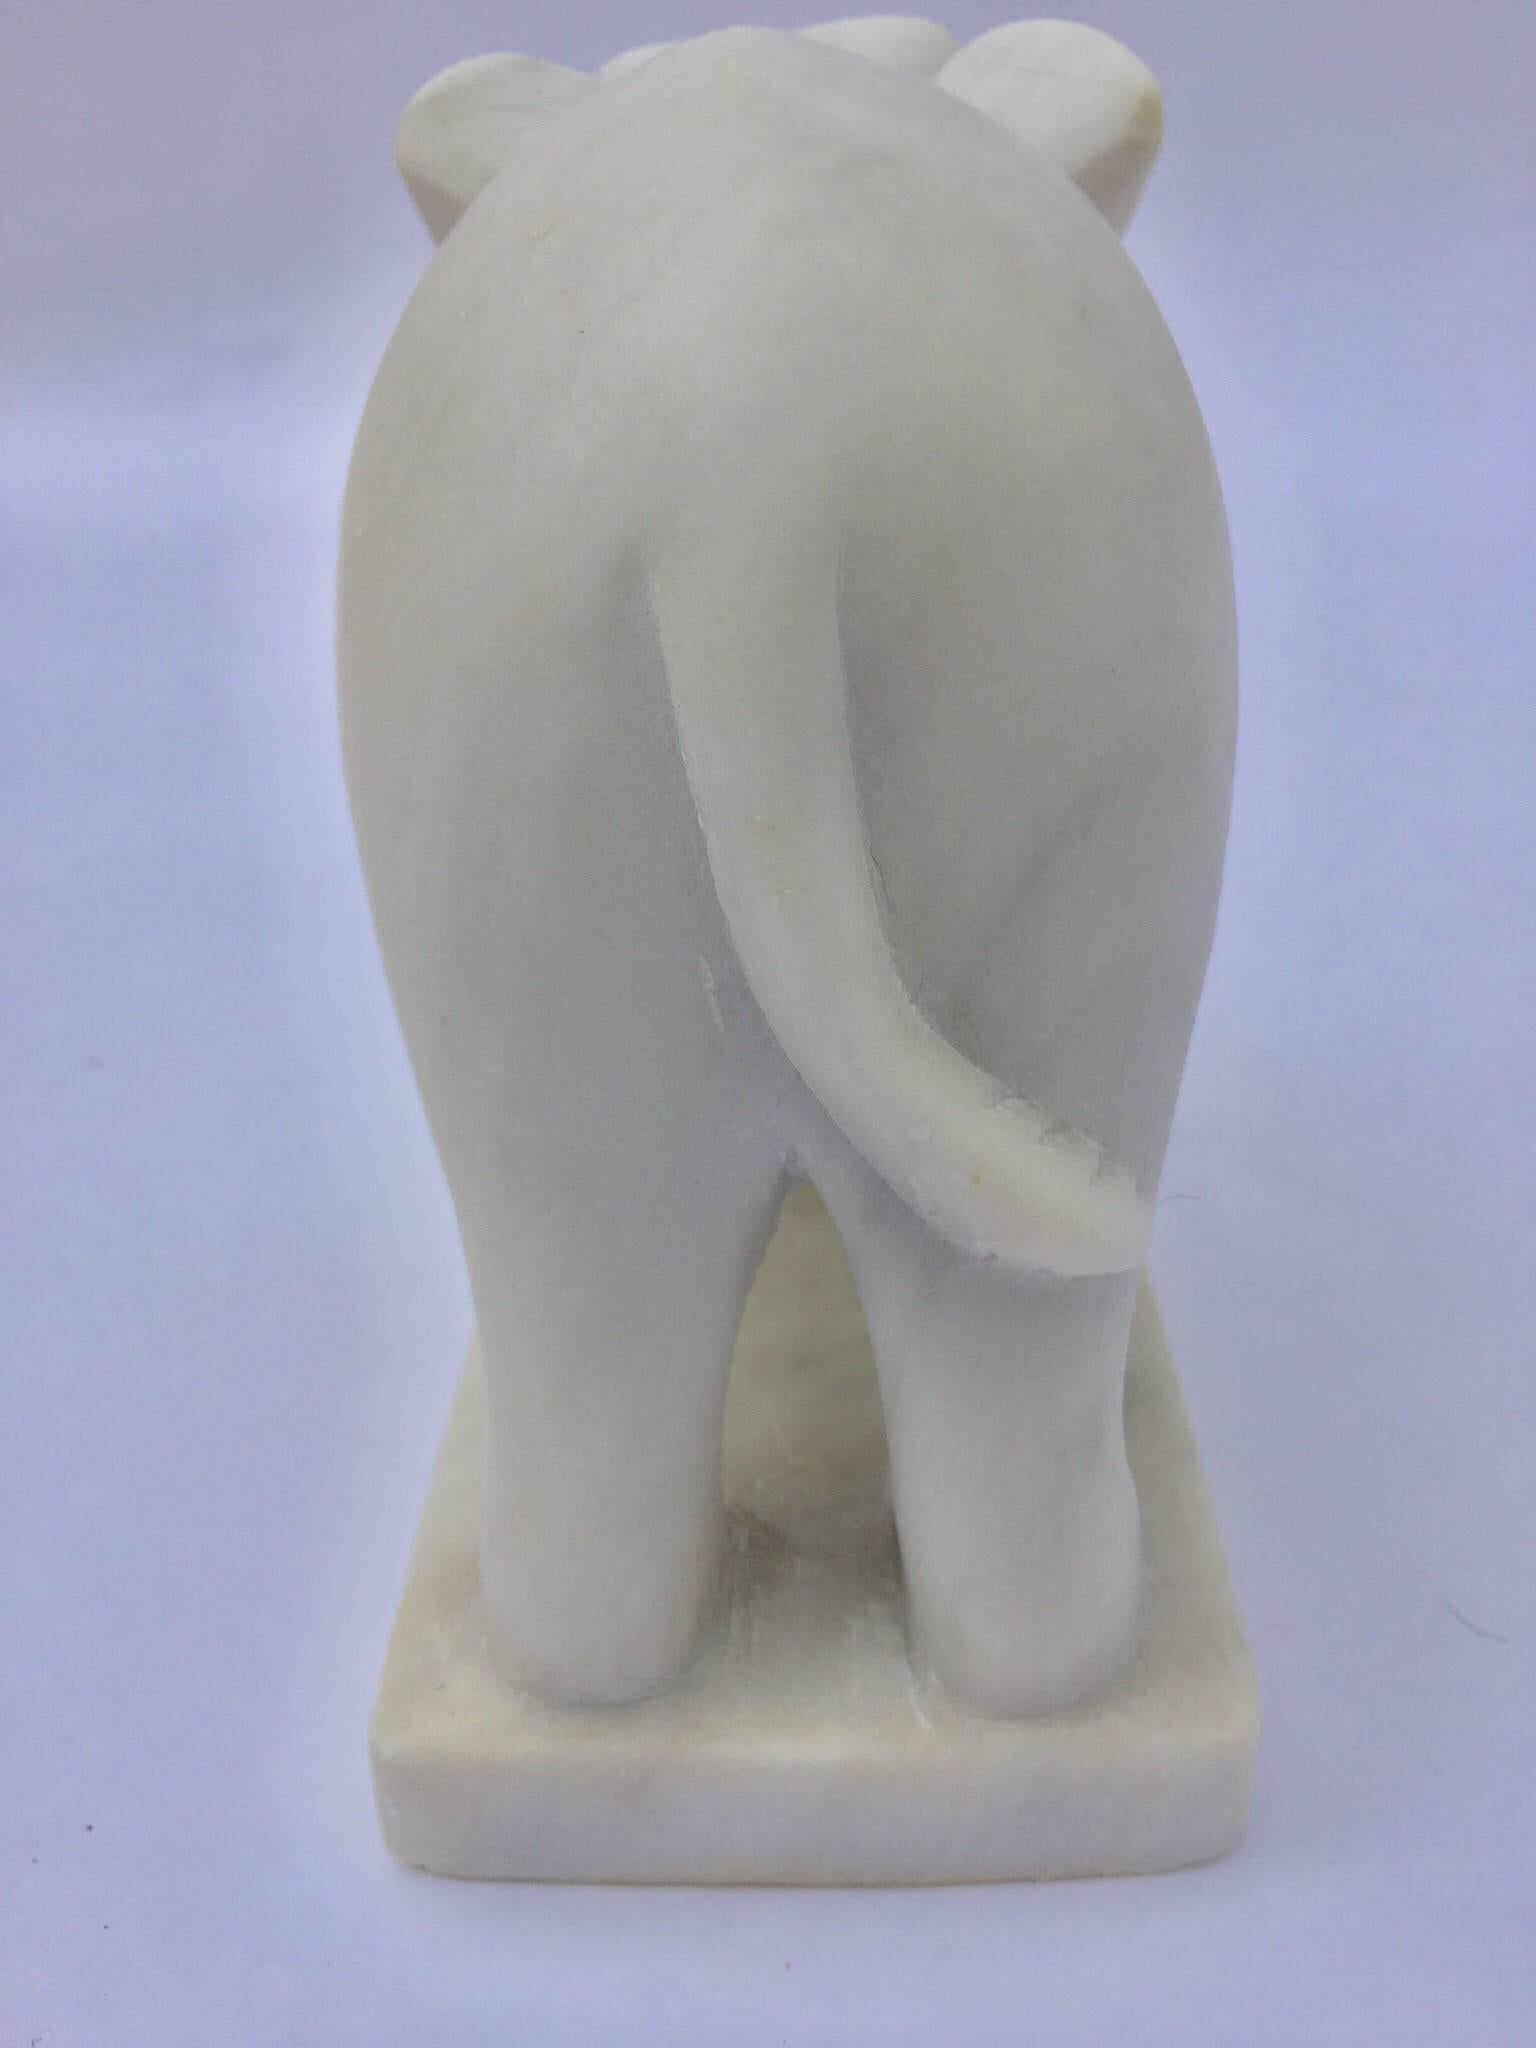 20th Century Hand-Carved White Elephant Marble Sculpture Jaipur, Rajasthan India